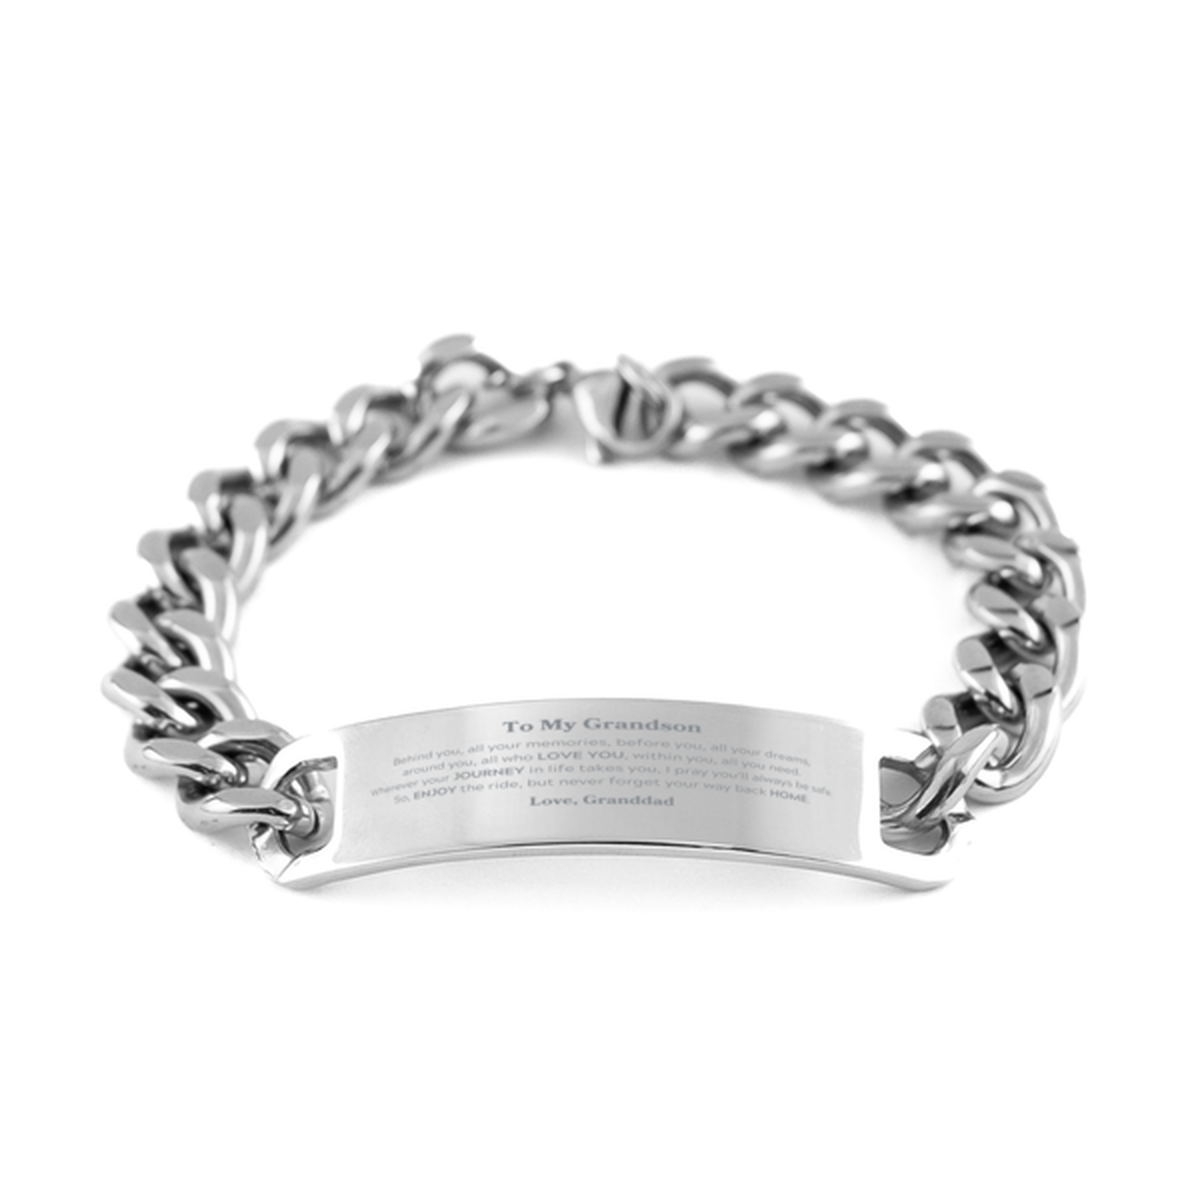 To My Grandson Graduation Gifts from Granddad, Grandson Cuban Chain Stainless Steel Bracelet Christmas Birthday Gifts for Grandson Behind you, all your memories, before you, all your dreams. Love, Granddad